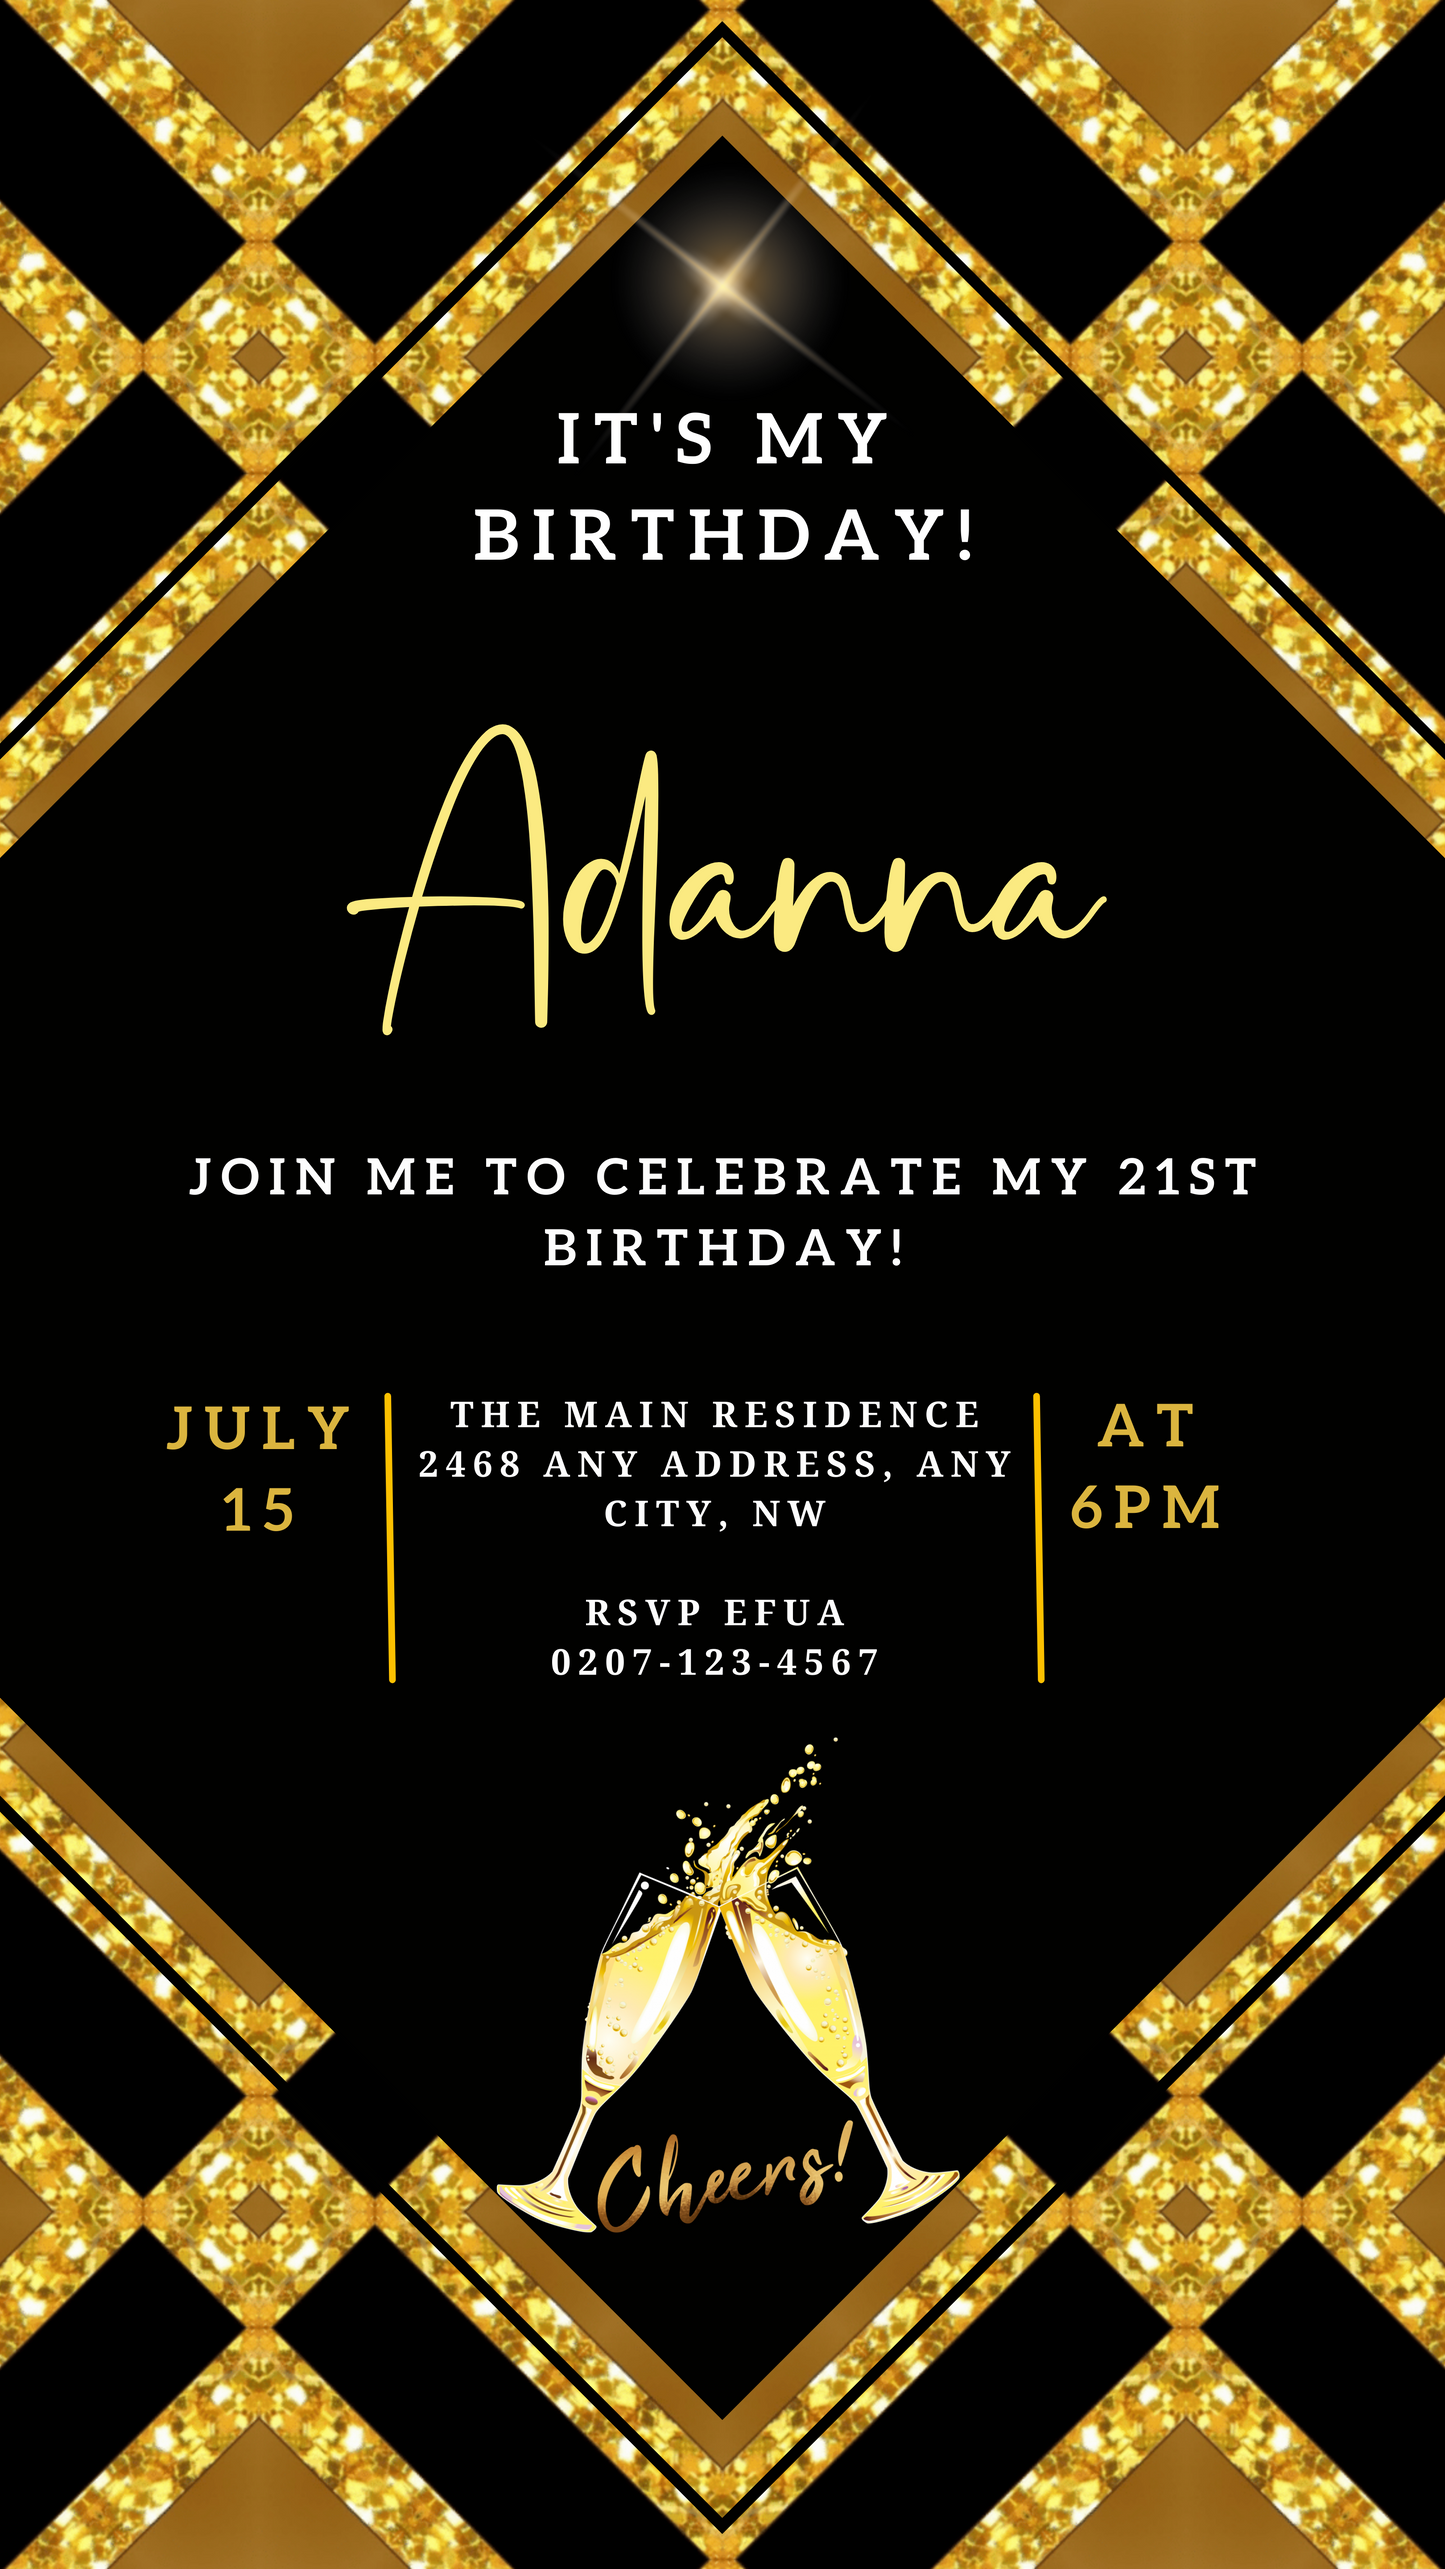 Customizable Gold Black Sparkle Birthday Evite showing elegant black and gold design with text and champagne glasses, editable via Canva for digital invitations.